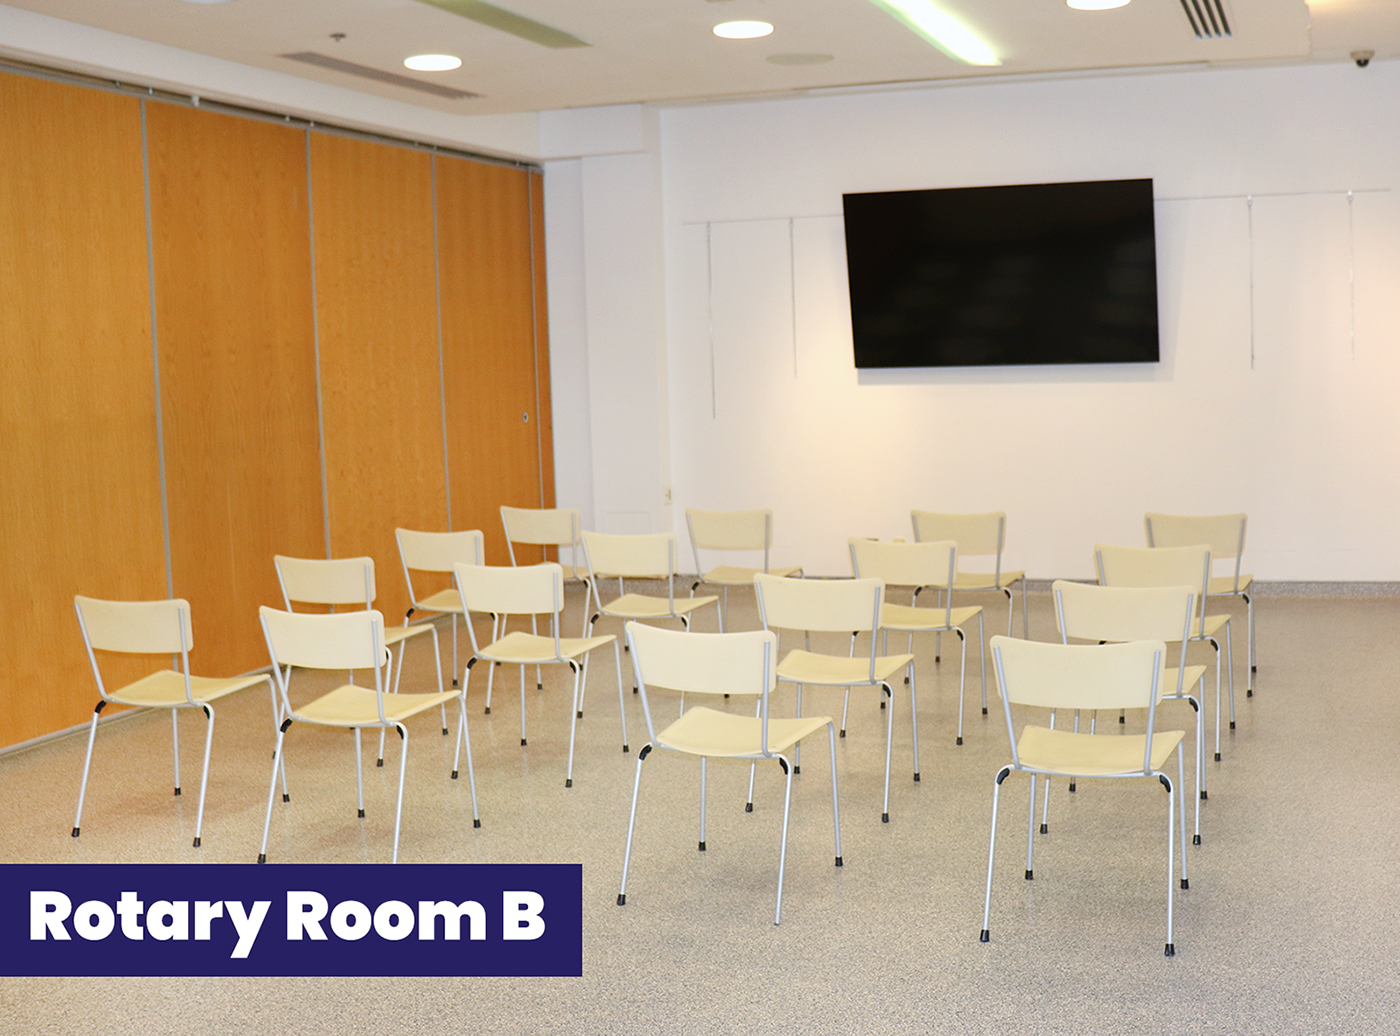 Example of Rotary Room B setup, presentation-style, with rows of chairs facing a TV screen on the wall.